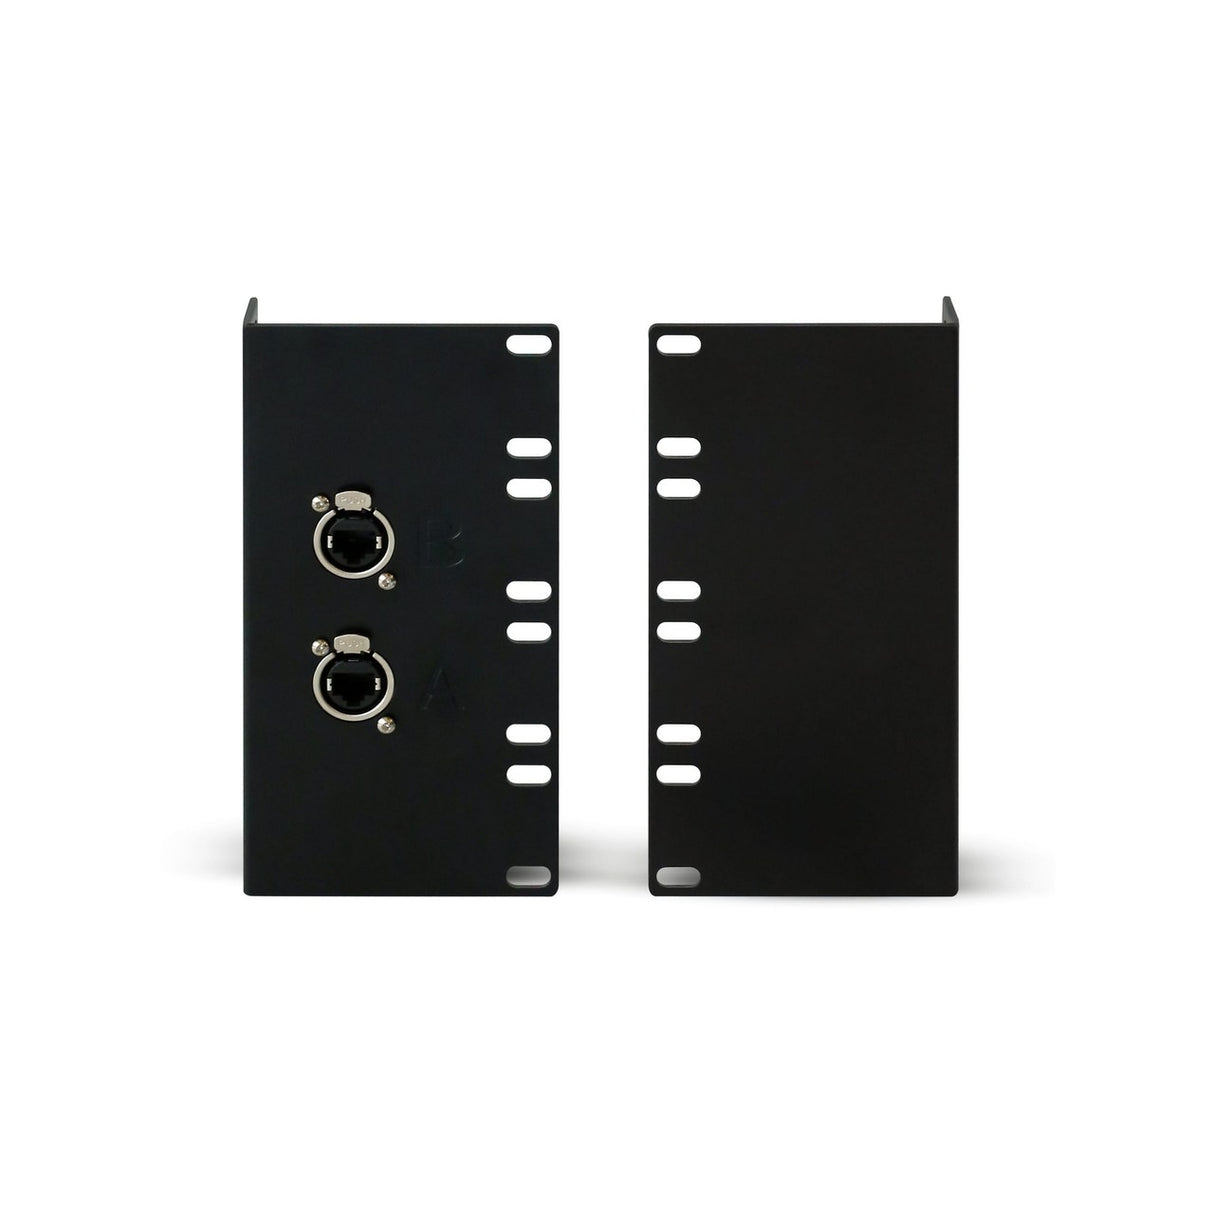 PreSonus Rack Mounting Kit with Two Blank Panels for NSB 16.8